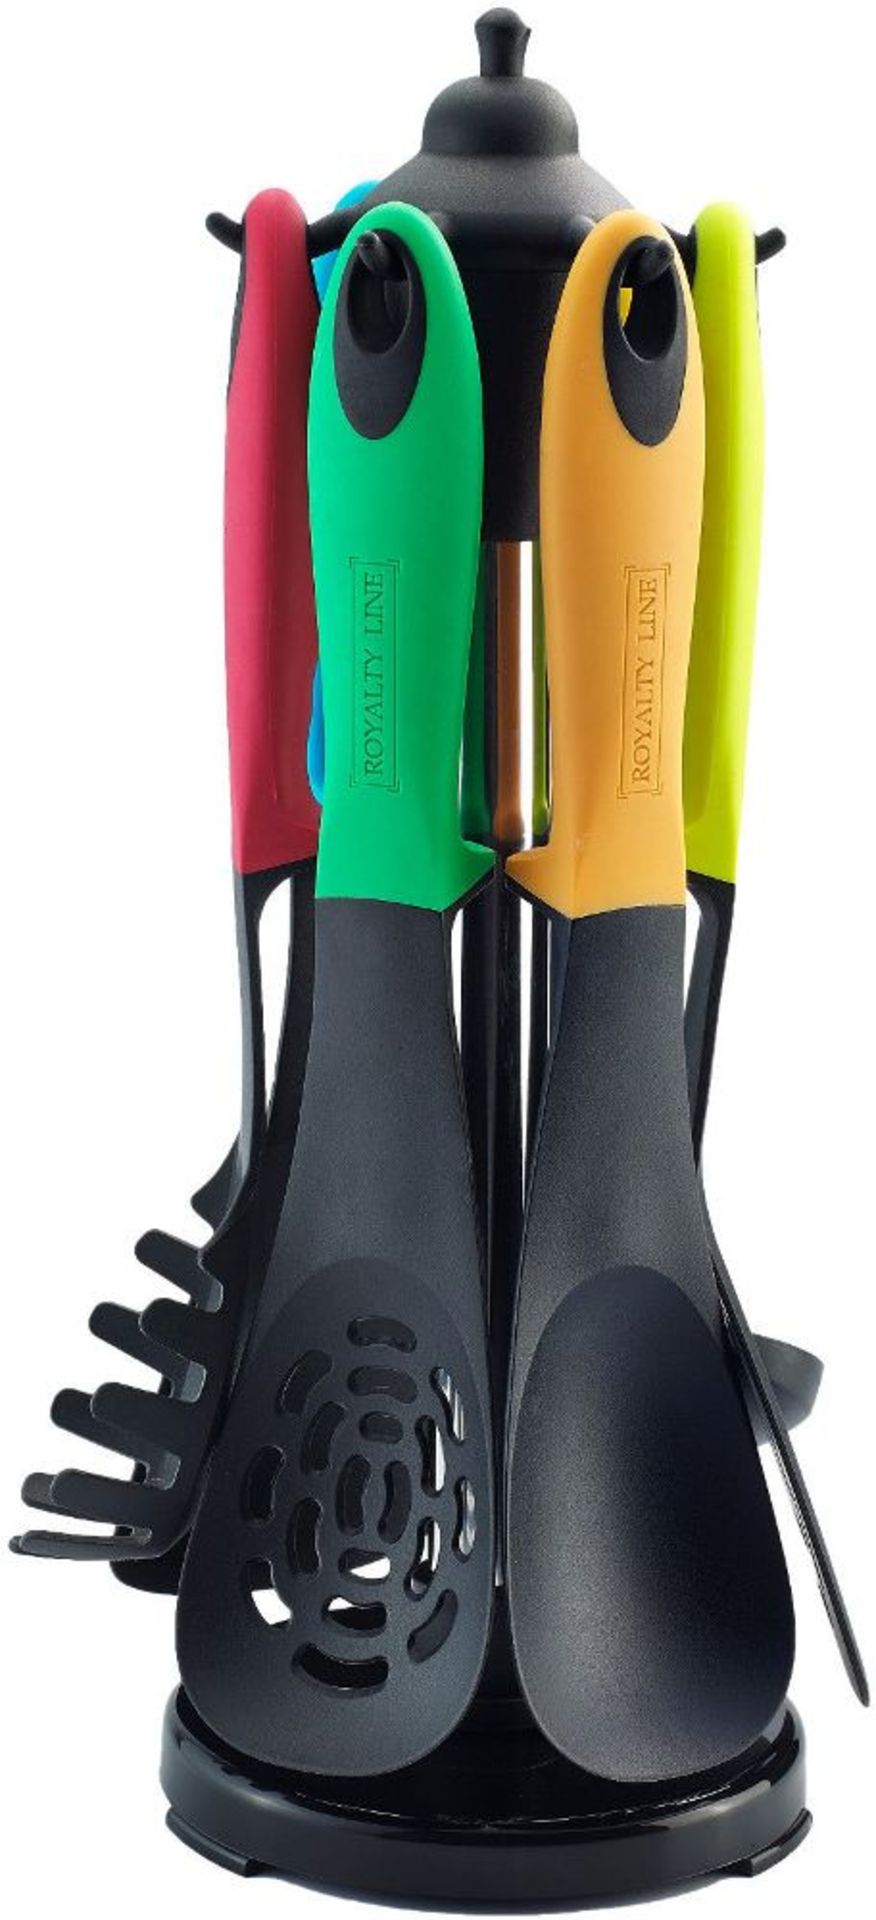 V *TRADE QTY* Brand New Royalty Line 7 Piece Kitchen Tool Set - Soft Touch Handles - ISP 19.47 Euros